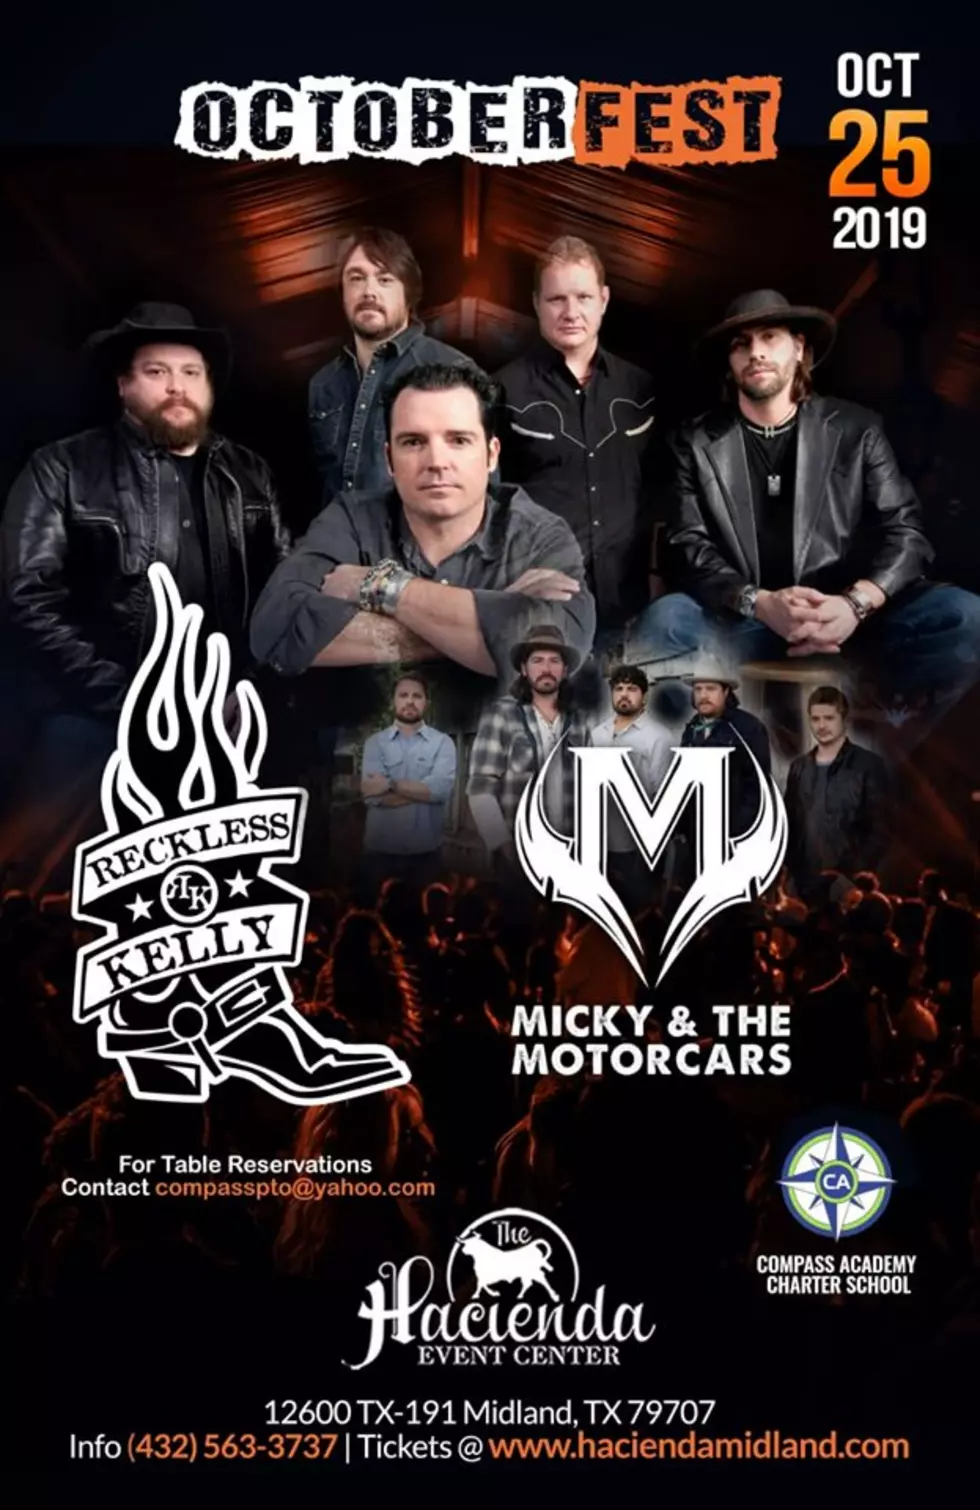 Don’t Miss Reckless Kelly And Mickey And The Motor Cars This Friday